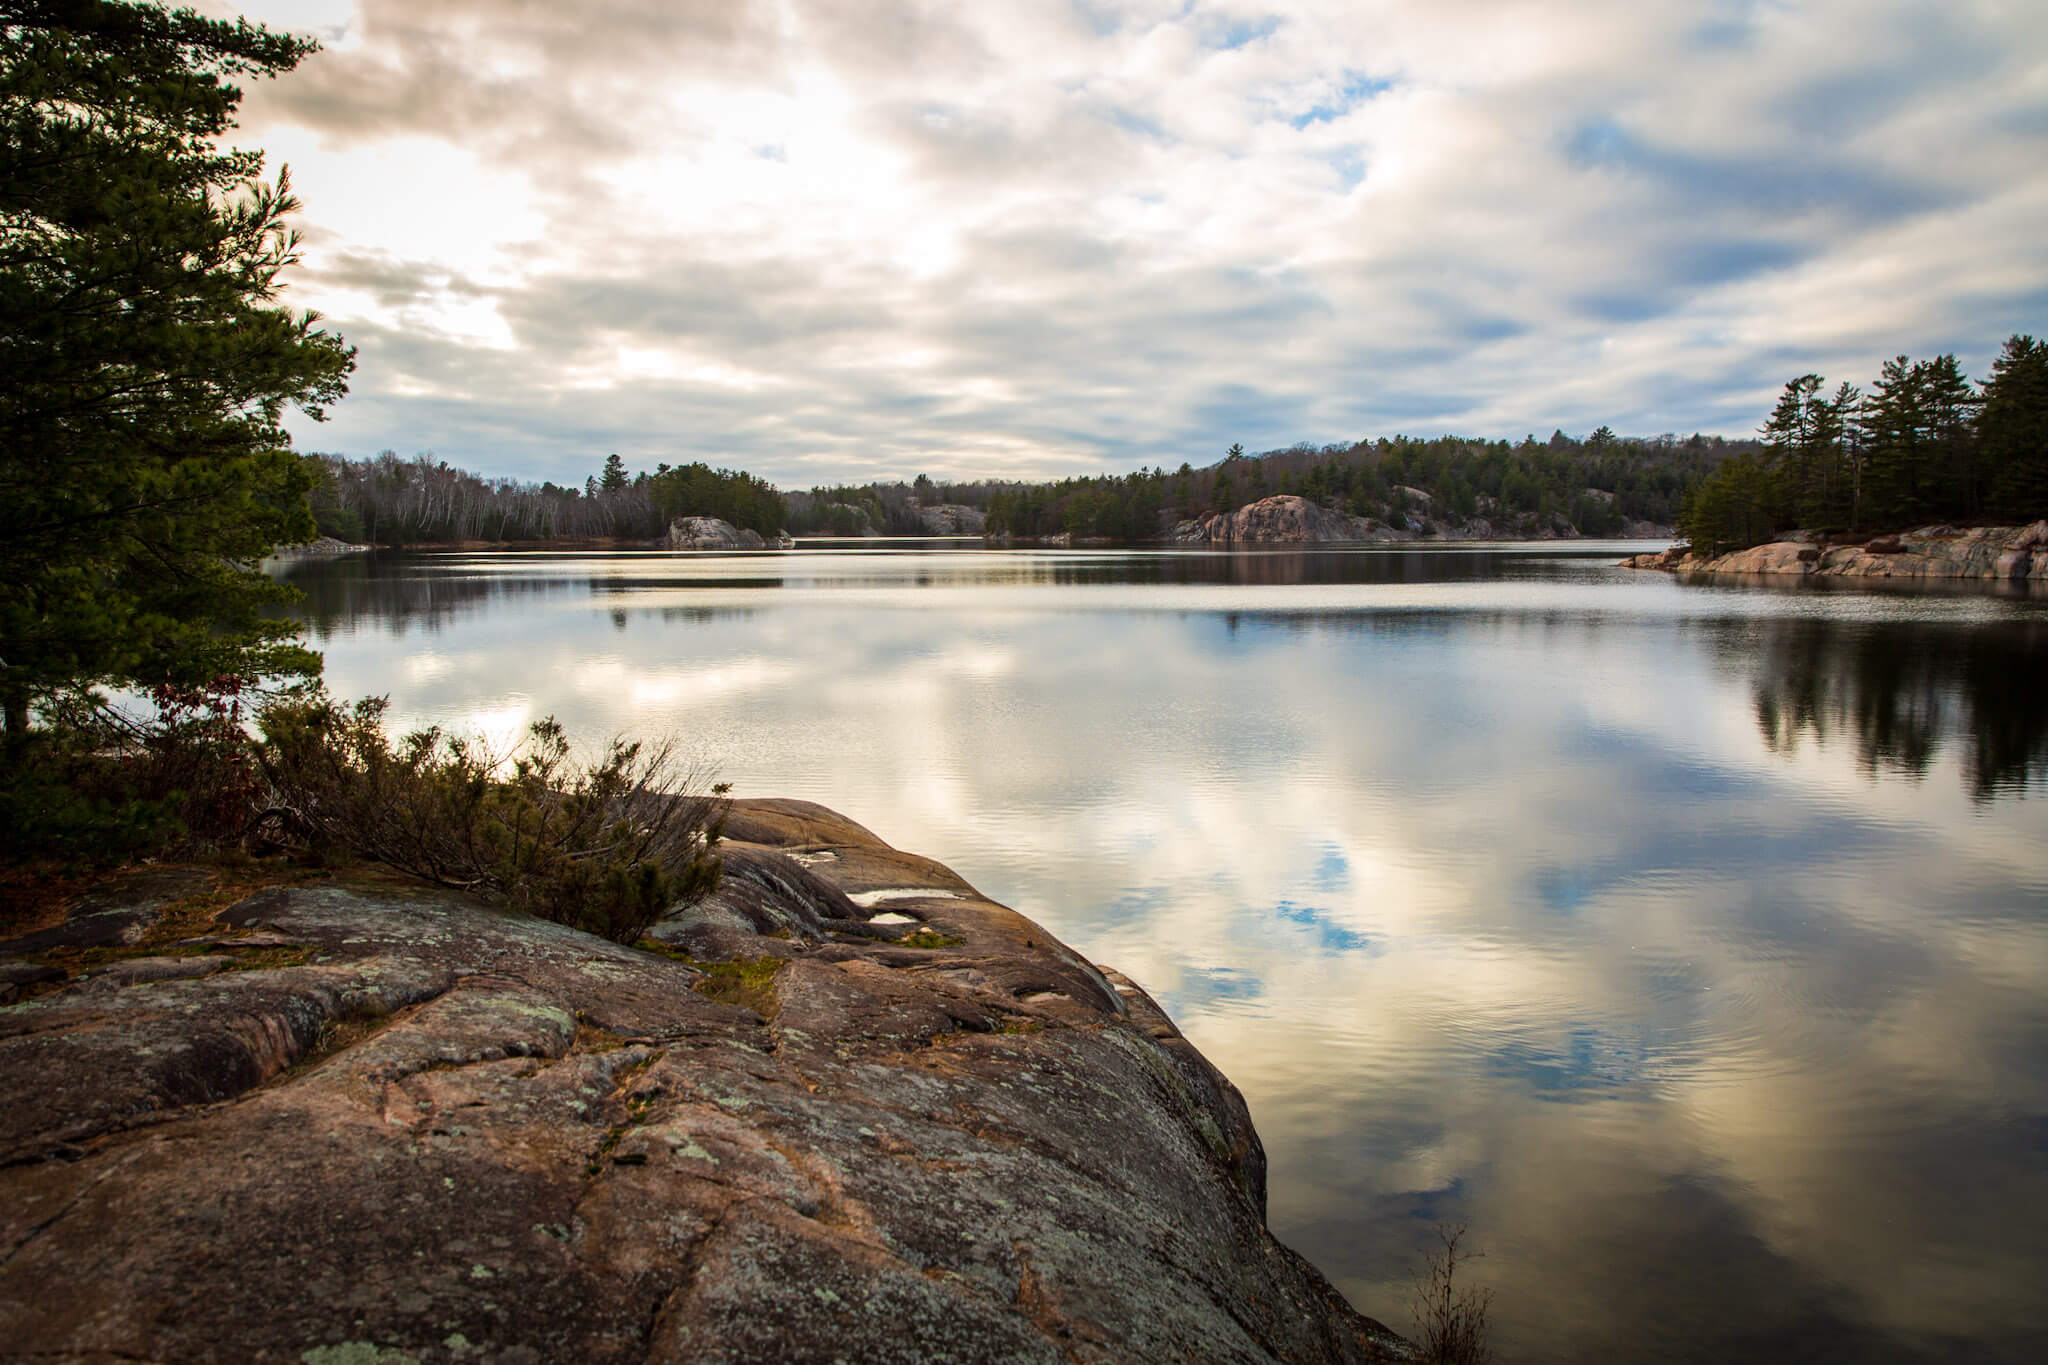 View of George Lake from campsites in Killarney Provincial Park